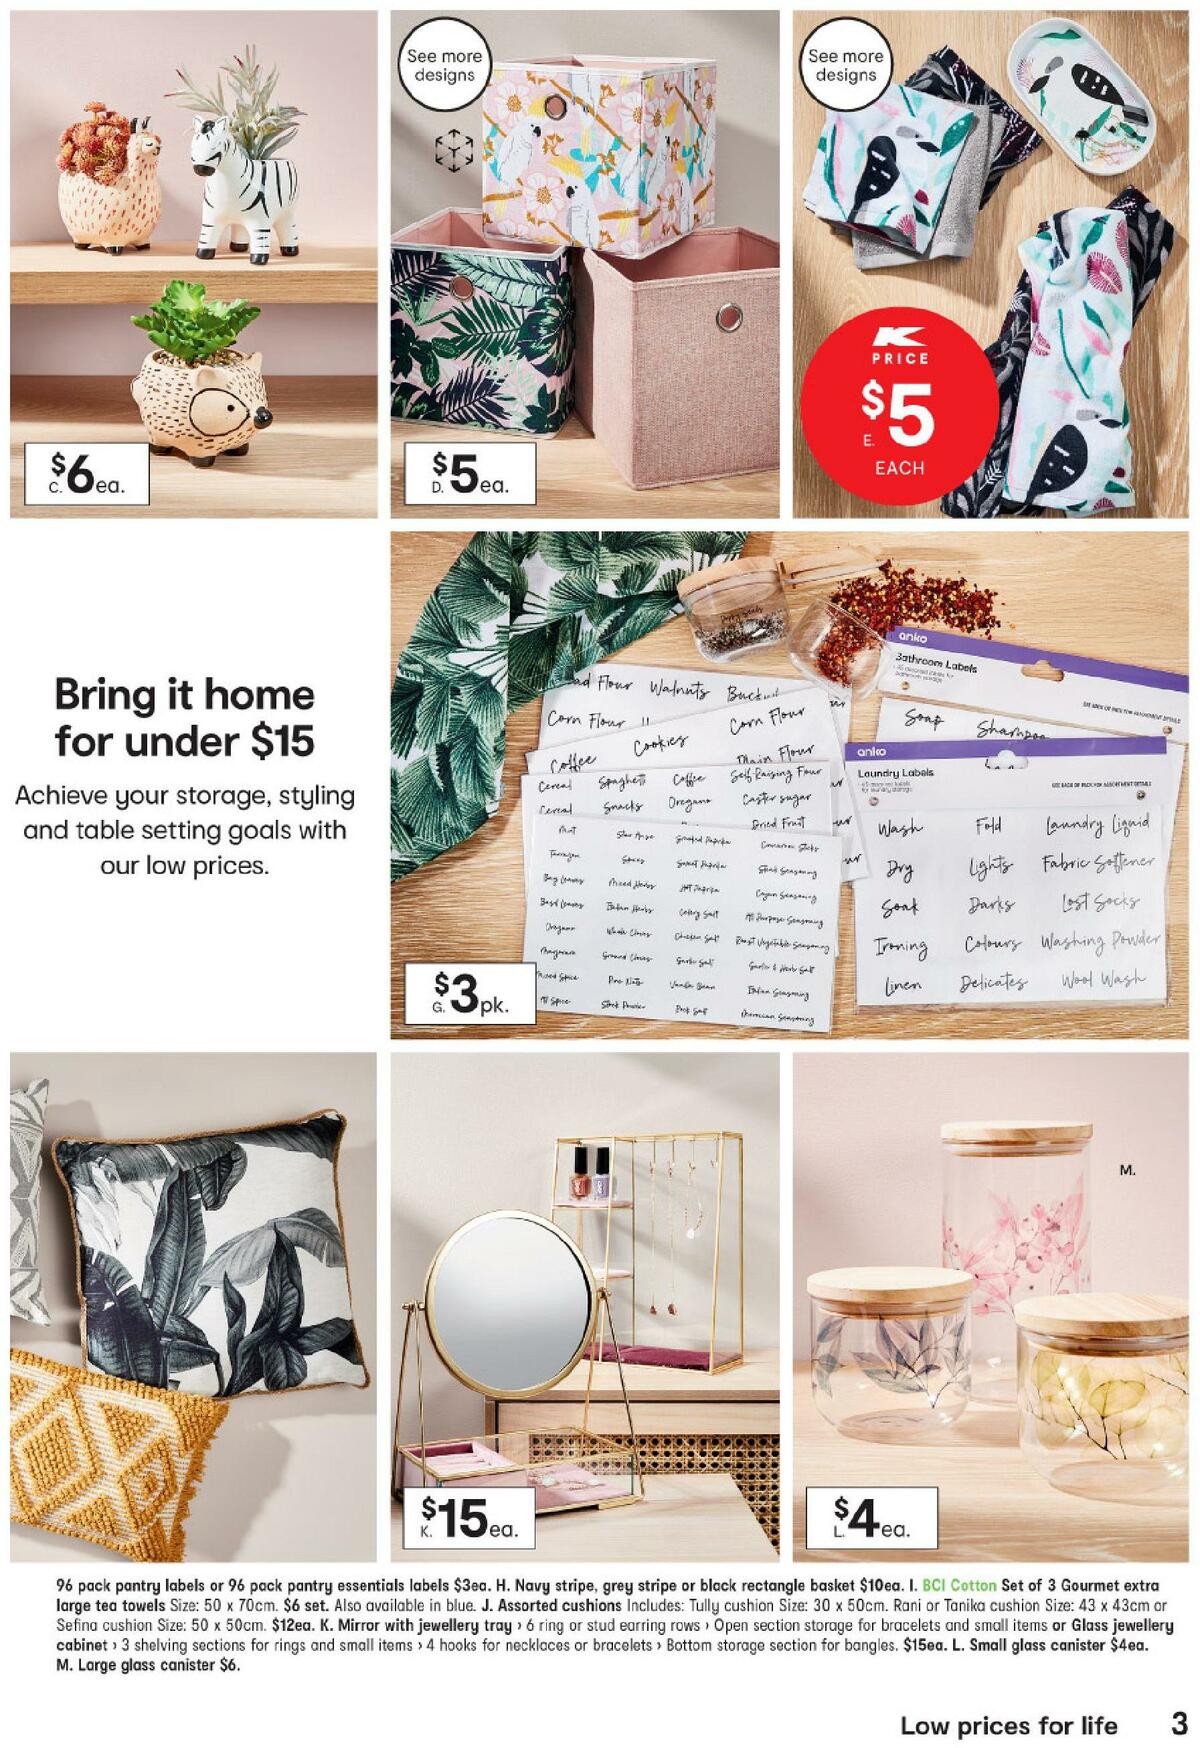 Kmart Catalogues from 30 July